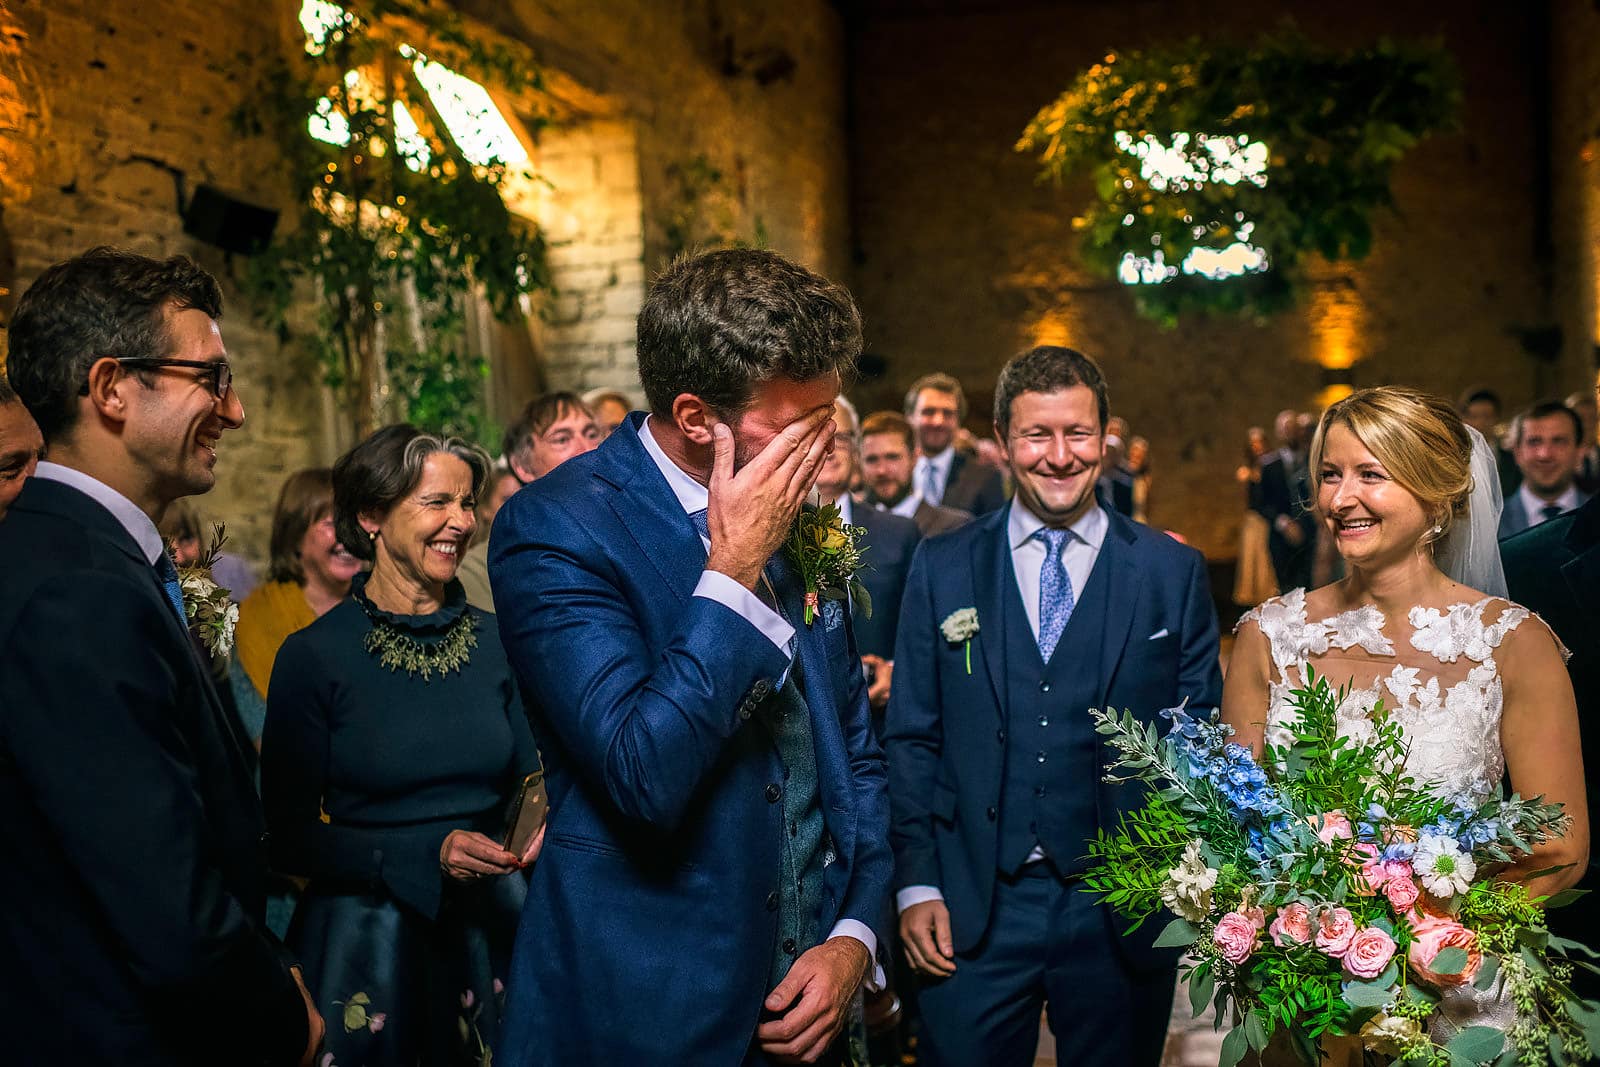 Cripps Barn is a great Cotswolds wedding